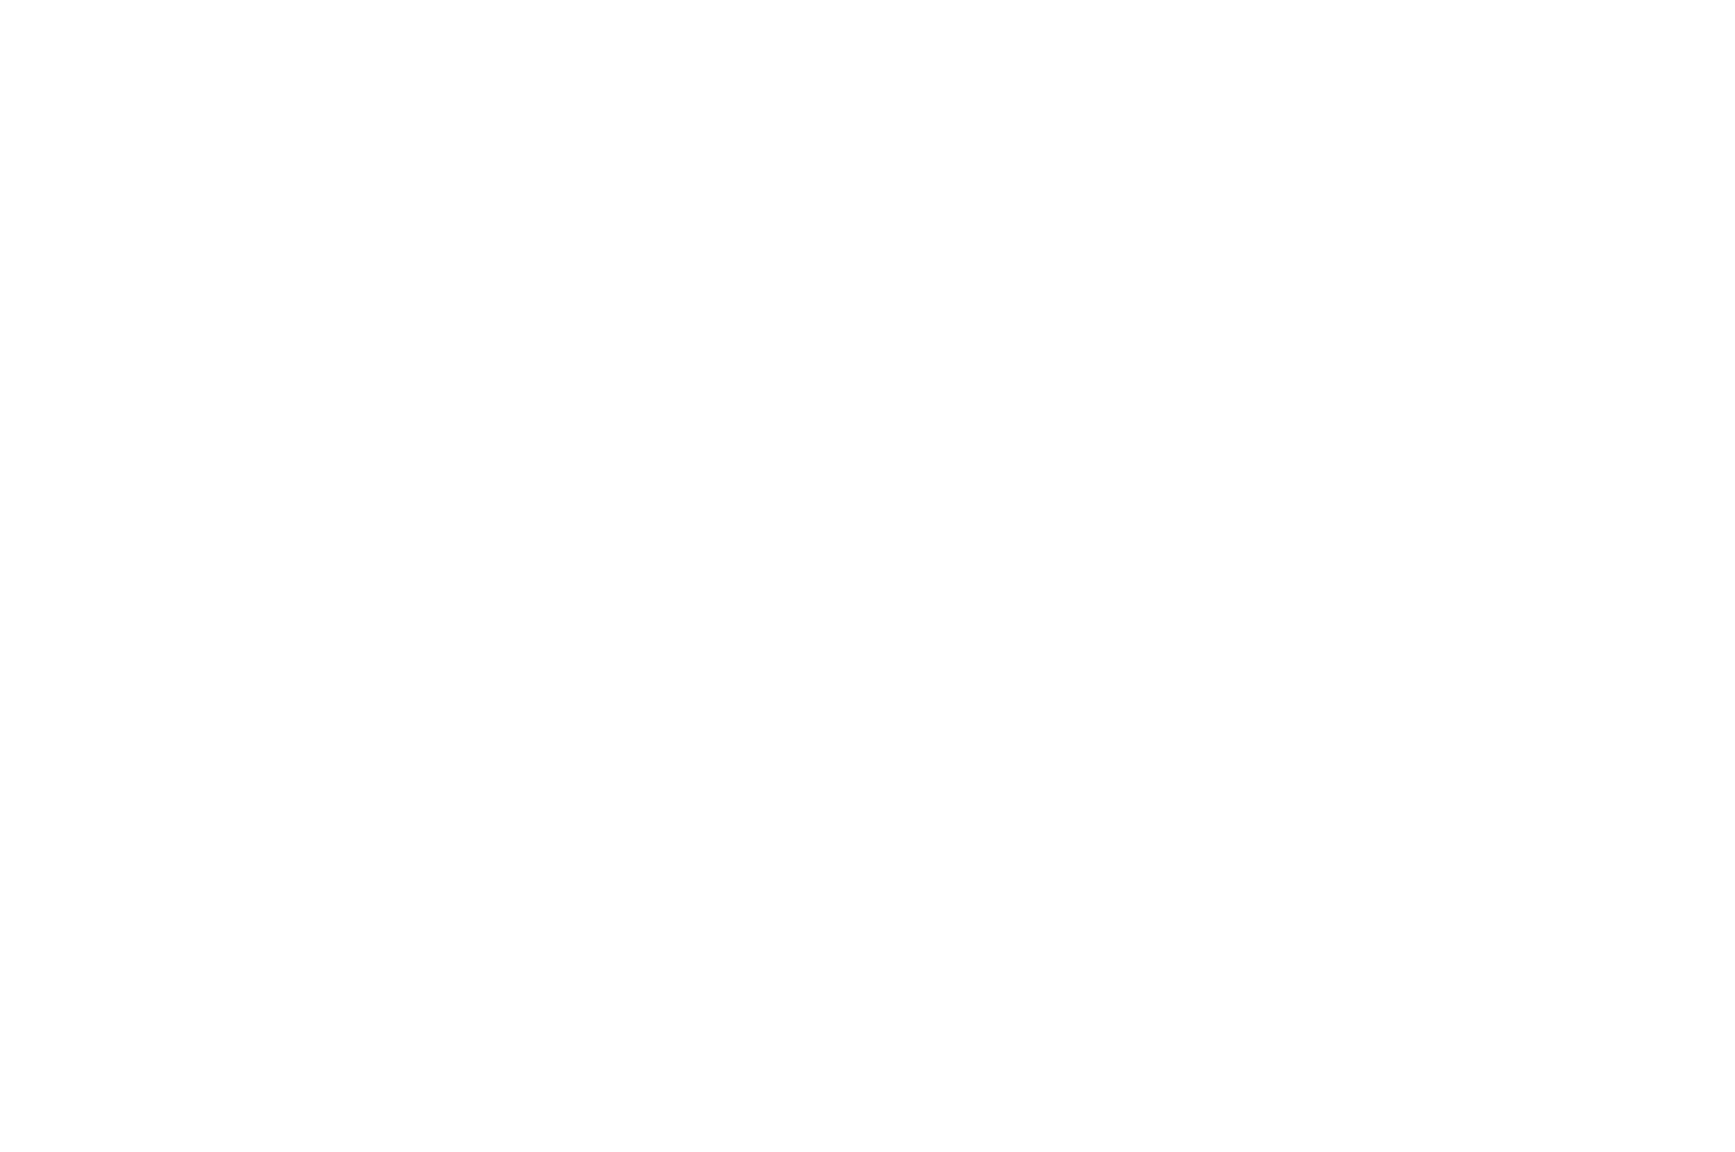 OFFICIAL SELECTION - Oregon Documentary Film Festival - 2023 (1).png